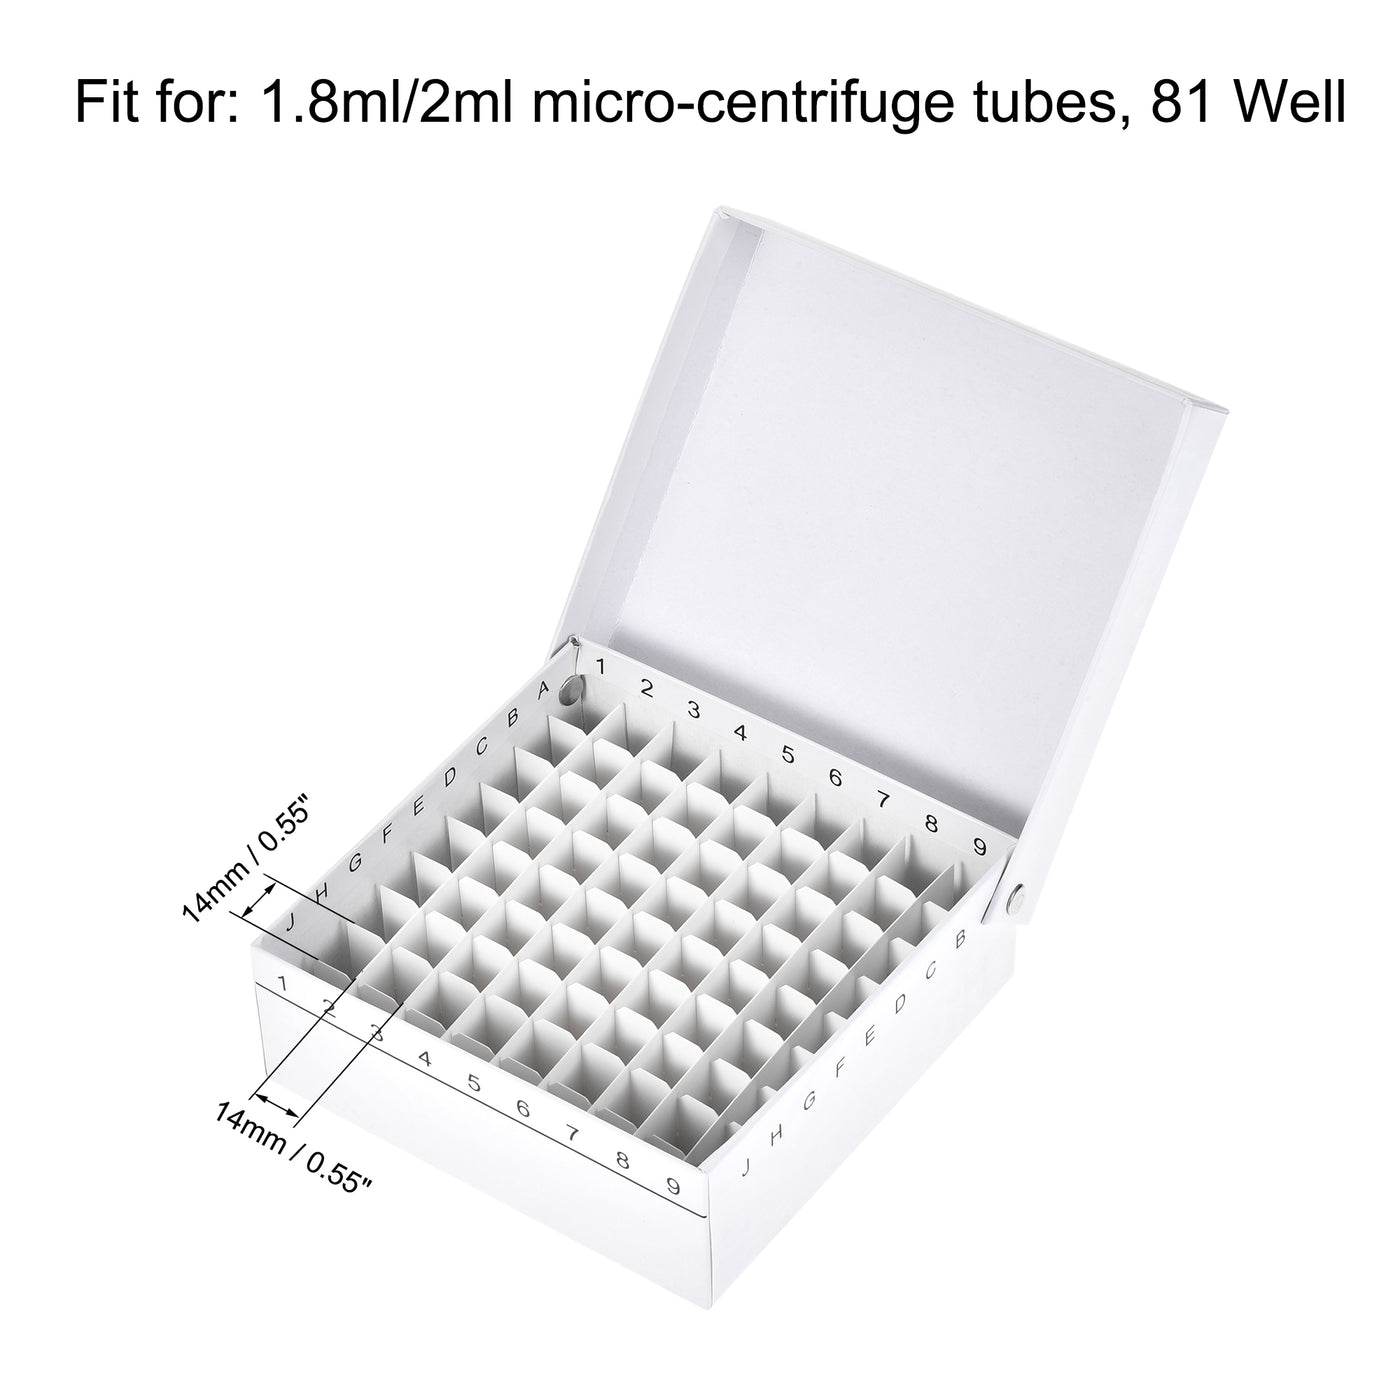 uxcell Uxcell Centrifuge Tube Holder 81-Well Waterproof Cardboard White for 1.8/2ml Tubes